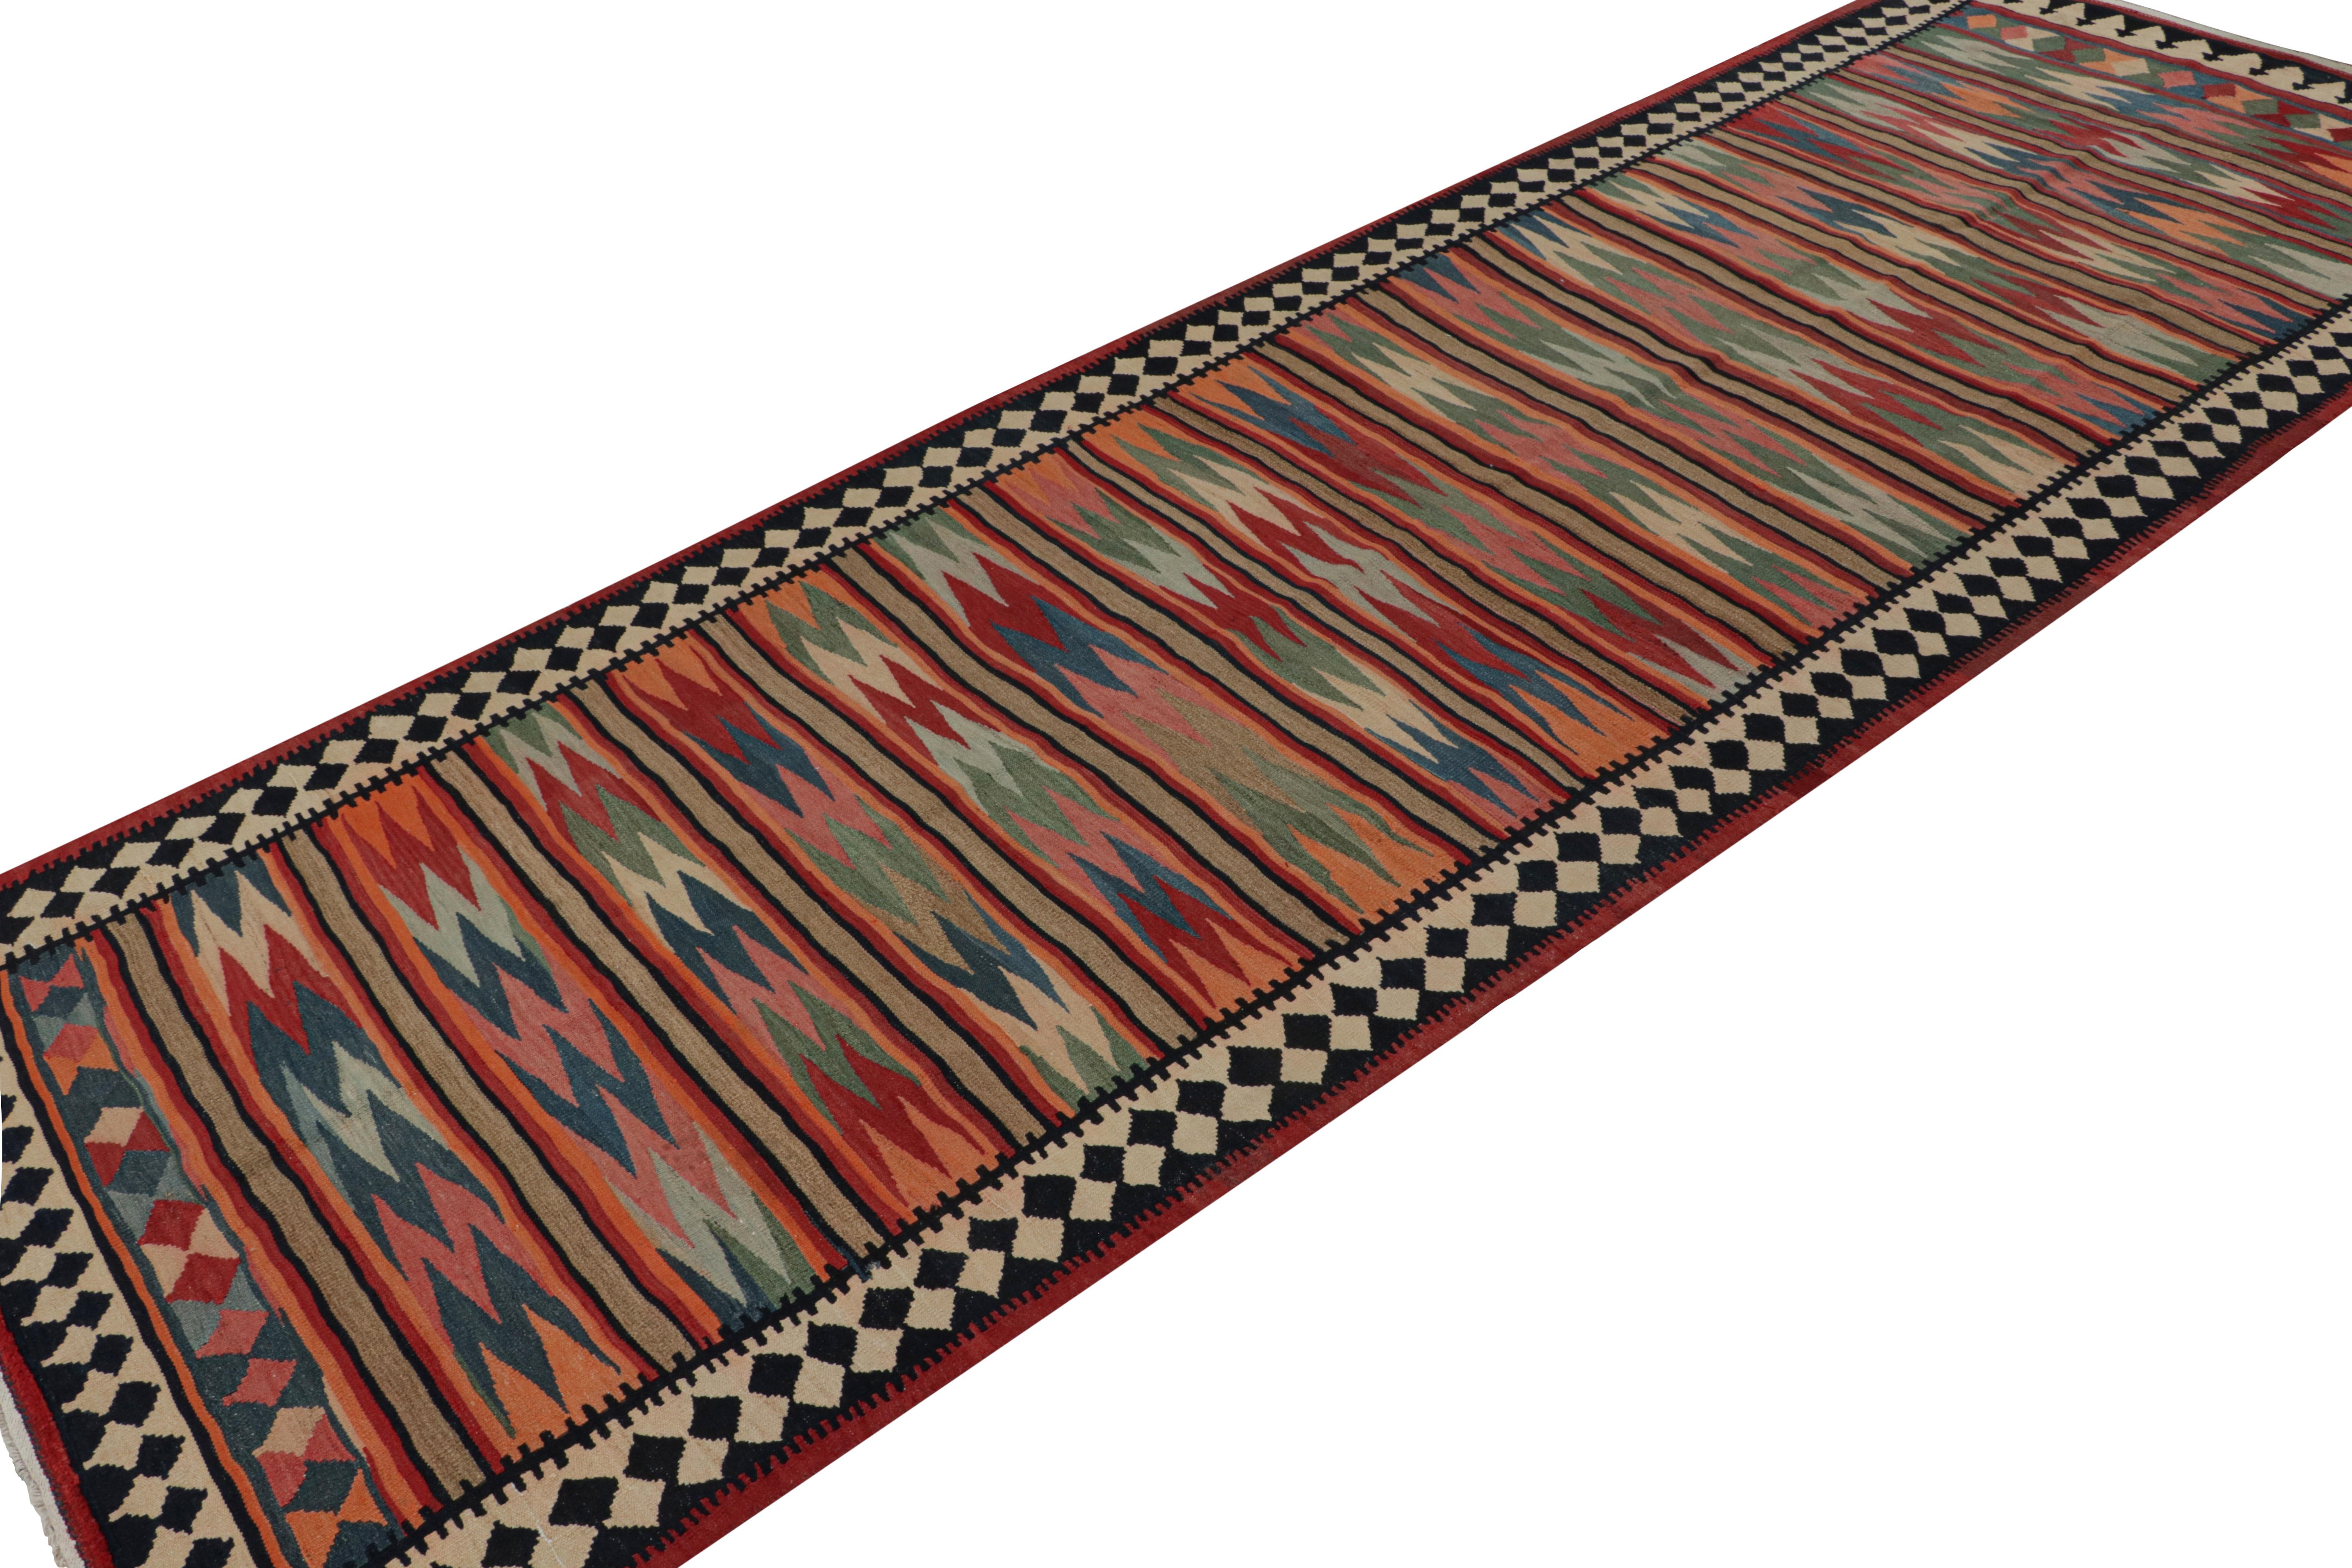 Handwoven in wool, circa 1950-1960, this 5x14 vintage Afghani tribal kilim rug, is nearly a gallery runner-sized artwork. With serrated geometric patterns, its design features a vibrant color palette of red, beige/brown, green, and blue. 

On the